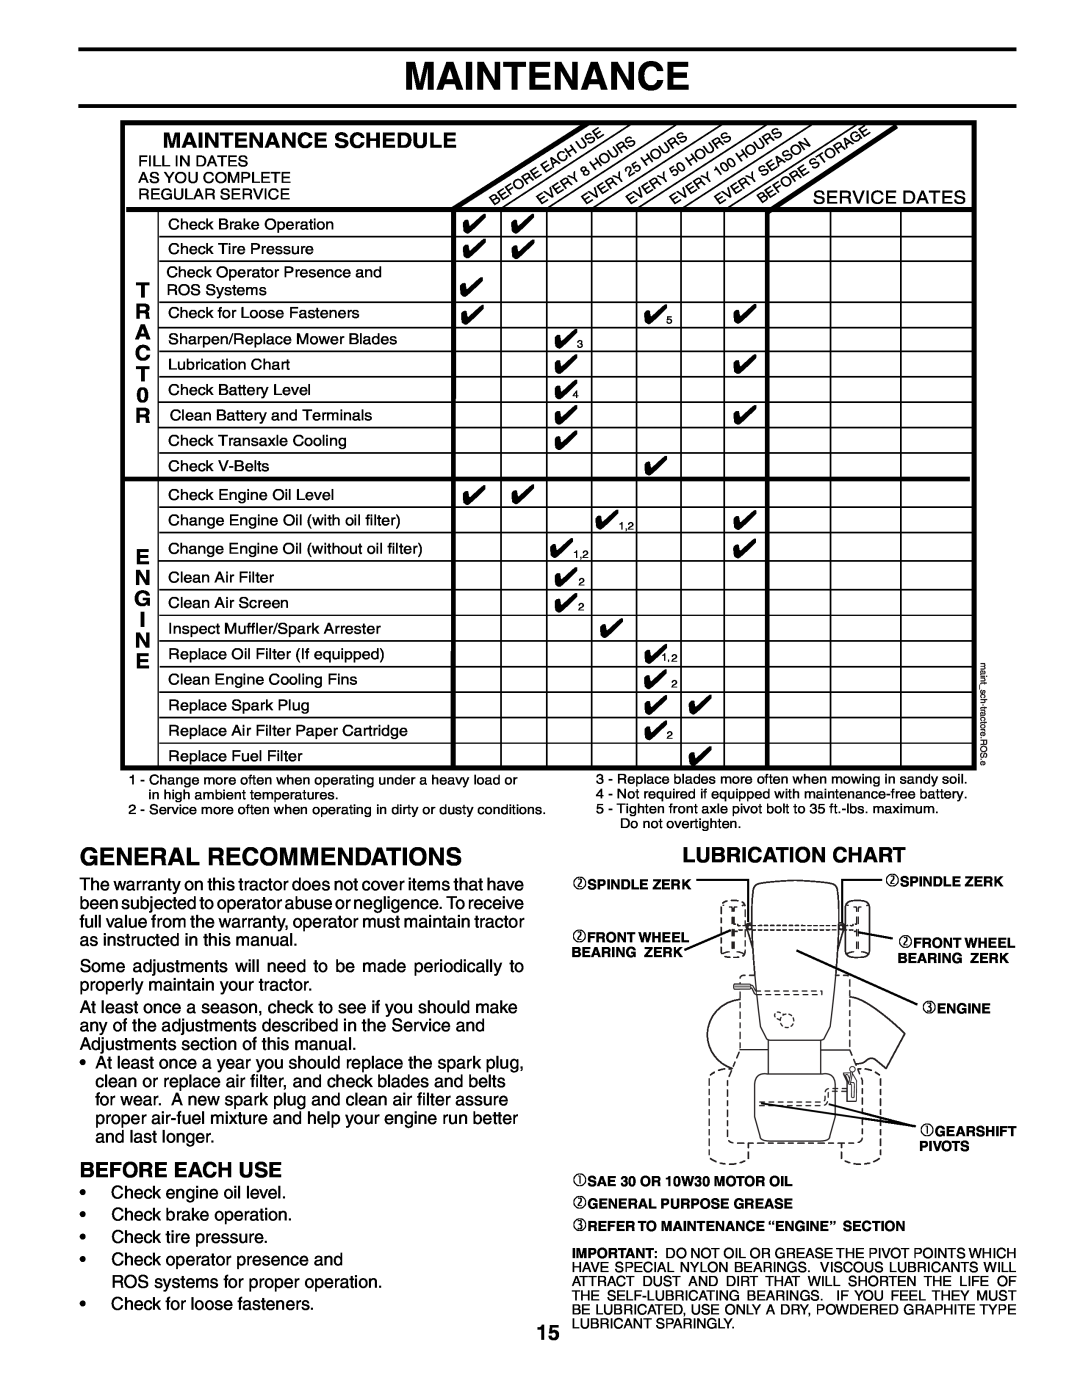 Poulan 401115, 96012004600 manual General Recommendations, Maintenance Schedule, Before Each Use, Lubrication Chart 